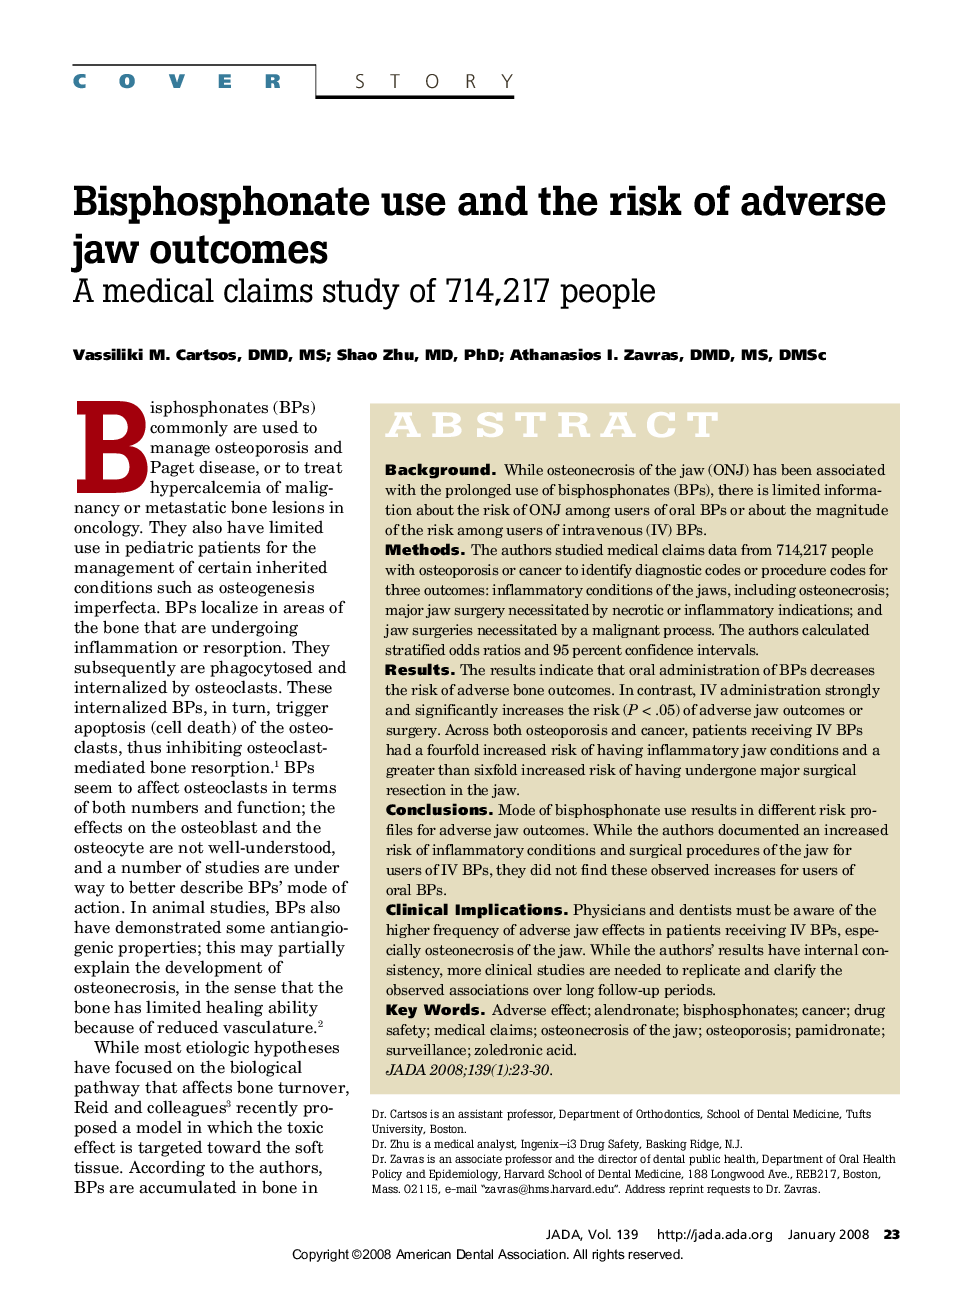 Bisphosphonate Use and the Risk of Adverse Jaw Outcomes : A medical claims study of 714,217 people